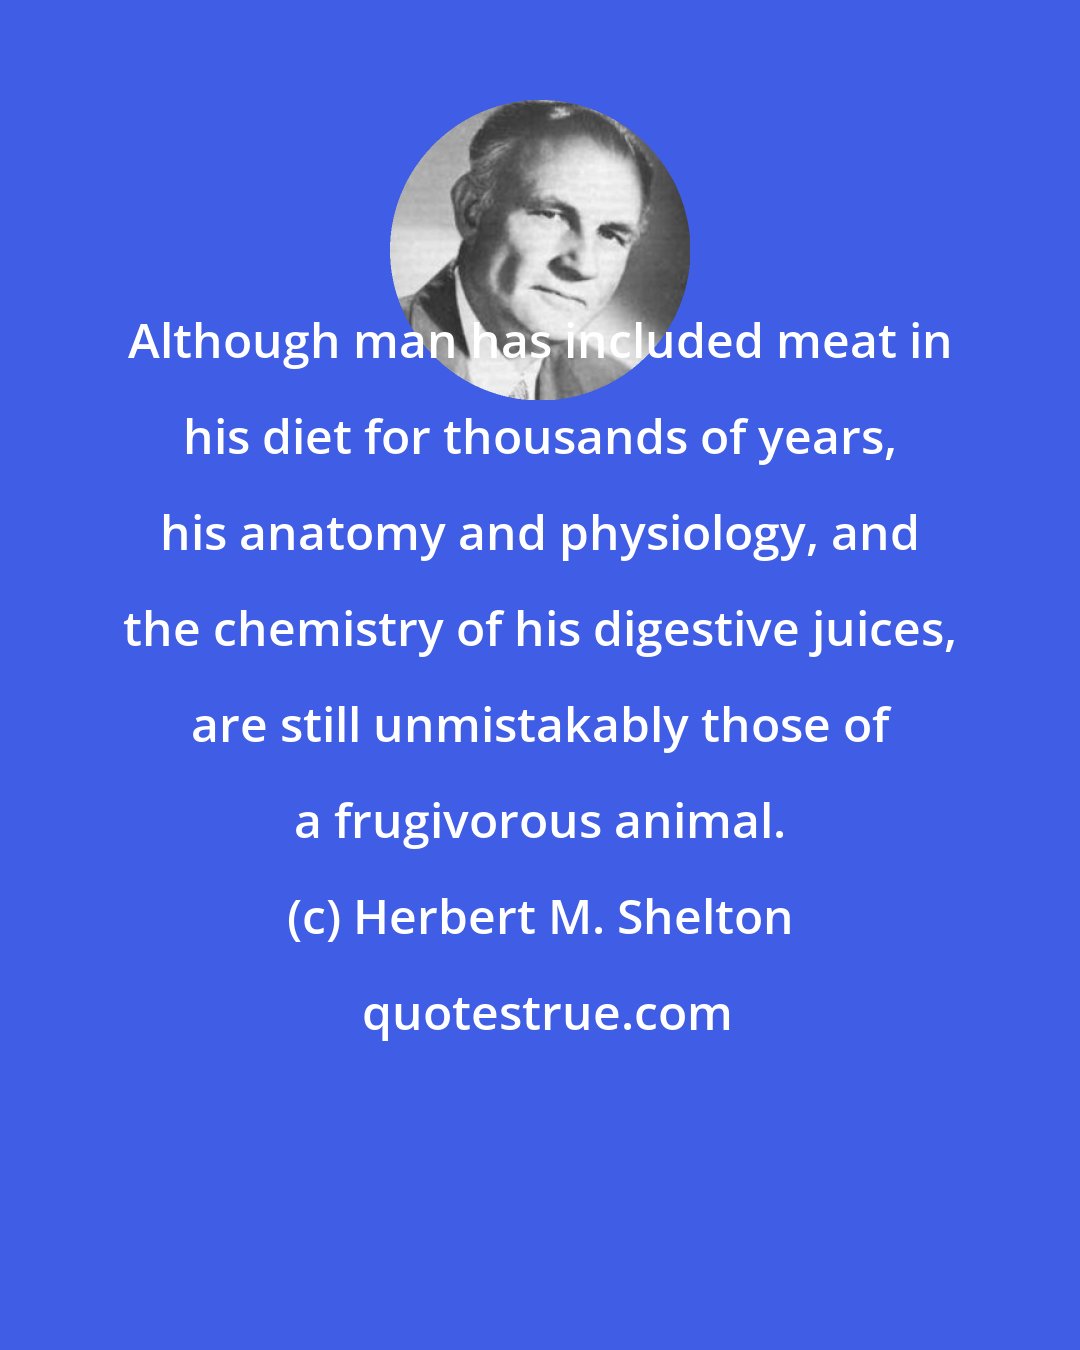 Herbert M. Shelton: Although man has included meat in his diet for thousands of years, his anatomy and physiology, and the chemistry of his digestive juices, are still unmistakably those of a frugivorous animal.